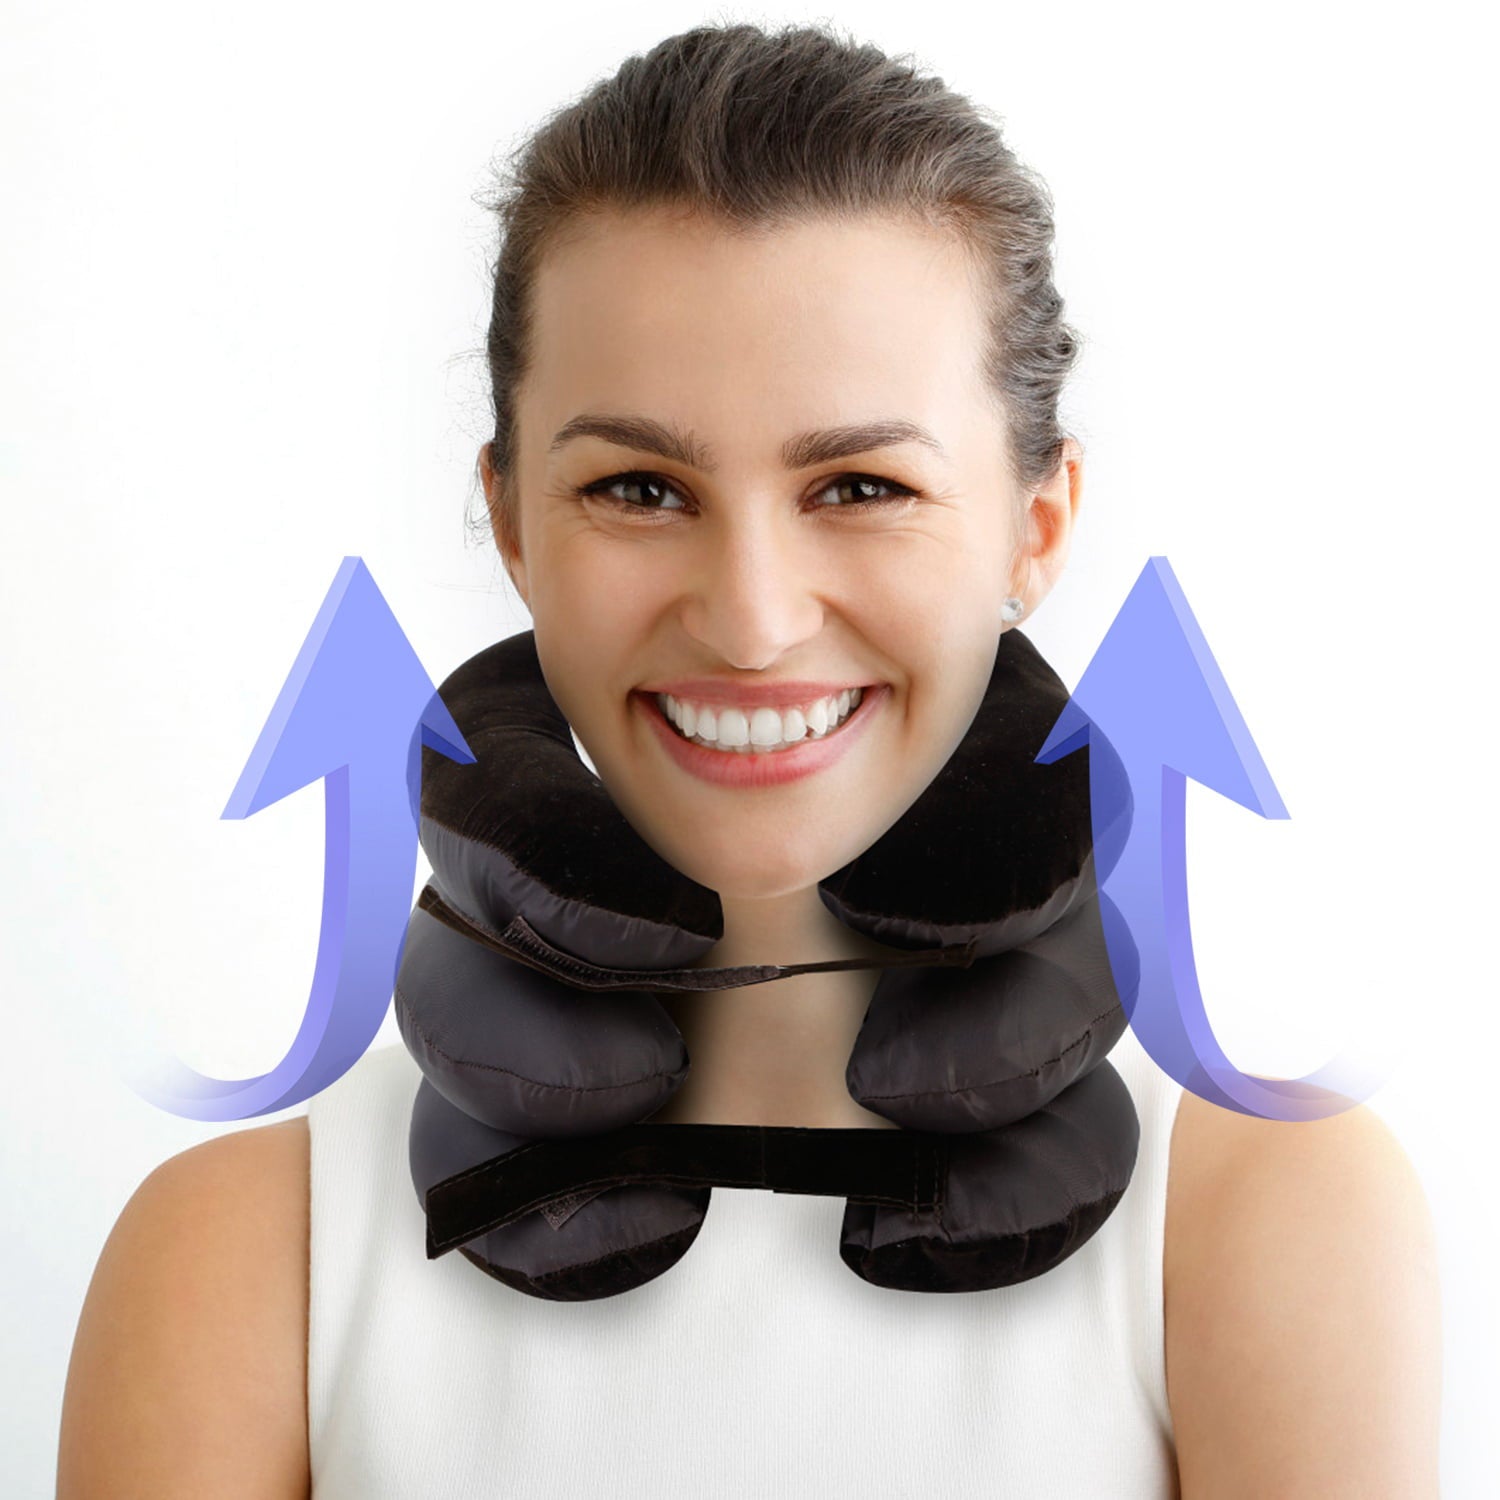 Cervical Neck Traction Device for Instant Neck Pain Relief, iMounTEK Inflatable & Adjustable Neck Stretcher Neck Support Brace, Best Neck Traction Pillow for Home Use Neck Decompression